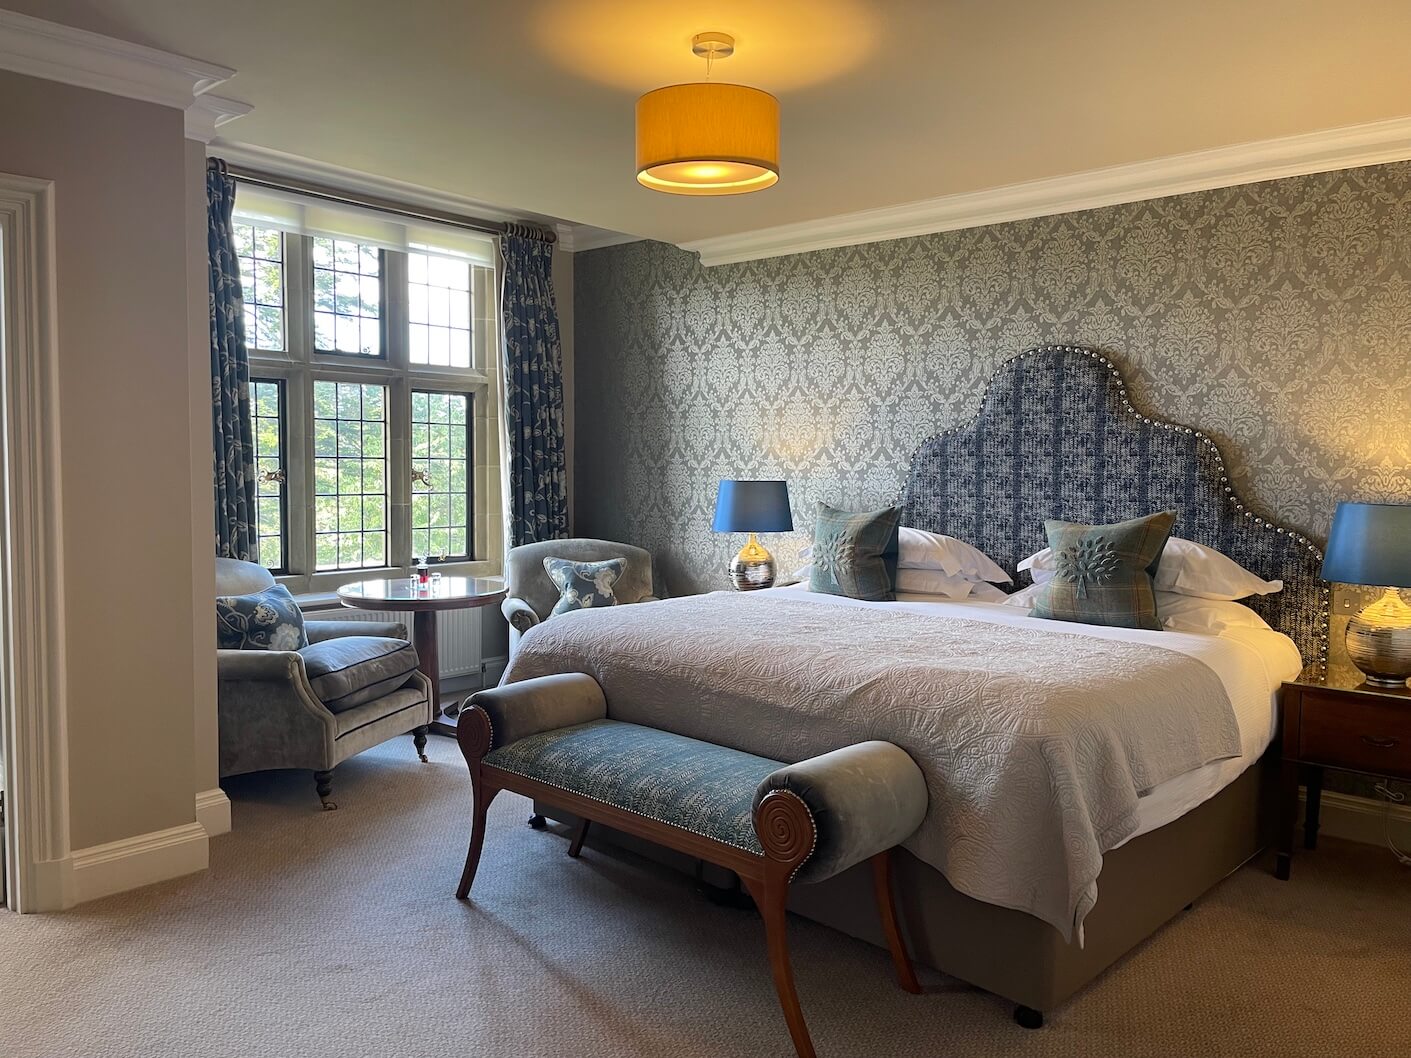 One of the 60 luxury bedrooms at Bovey Castle hotel